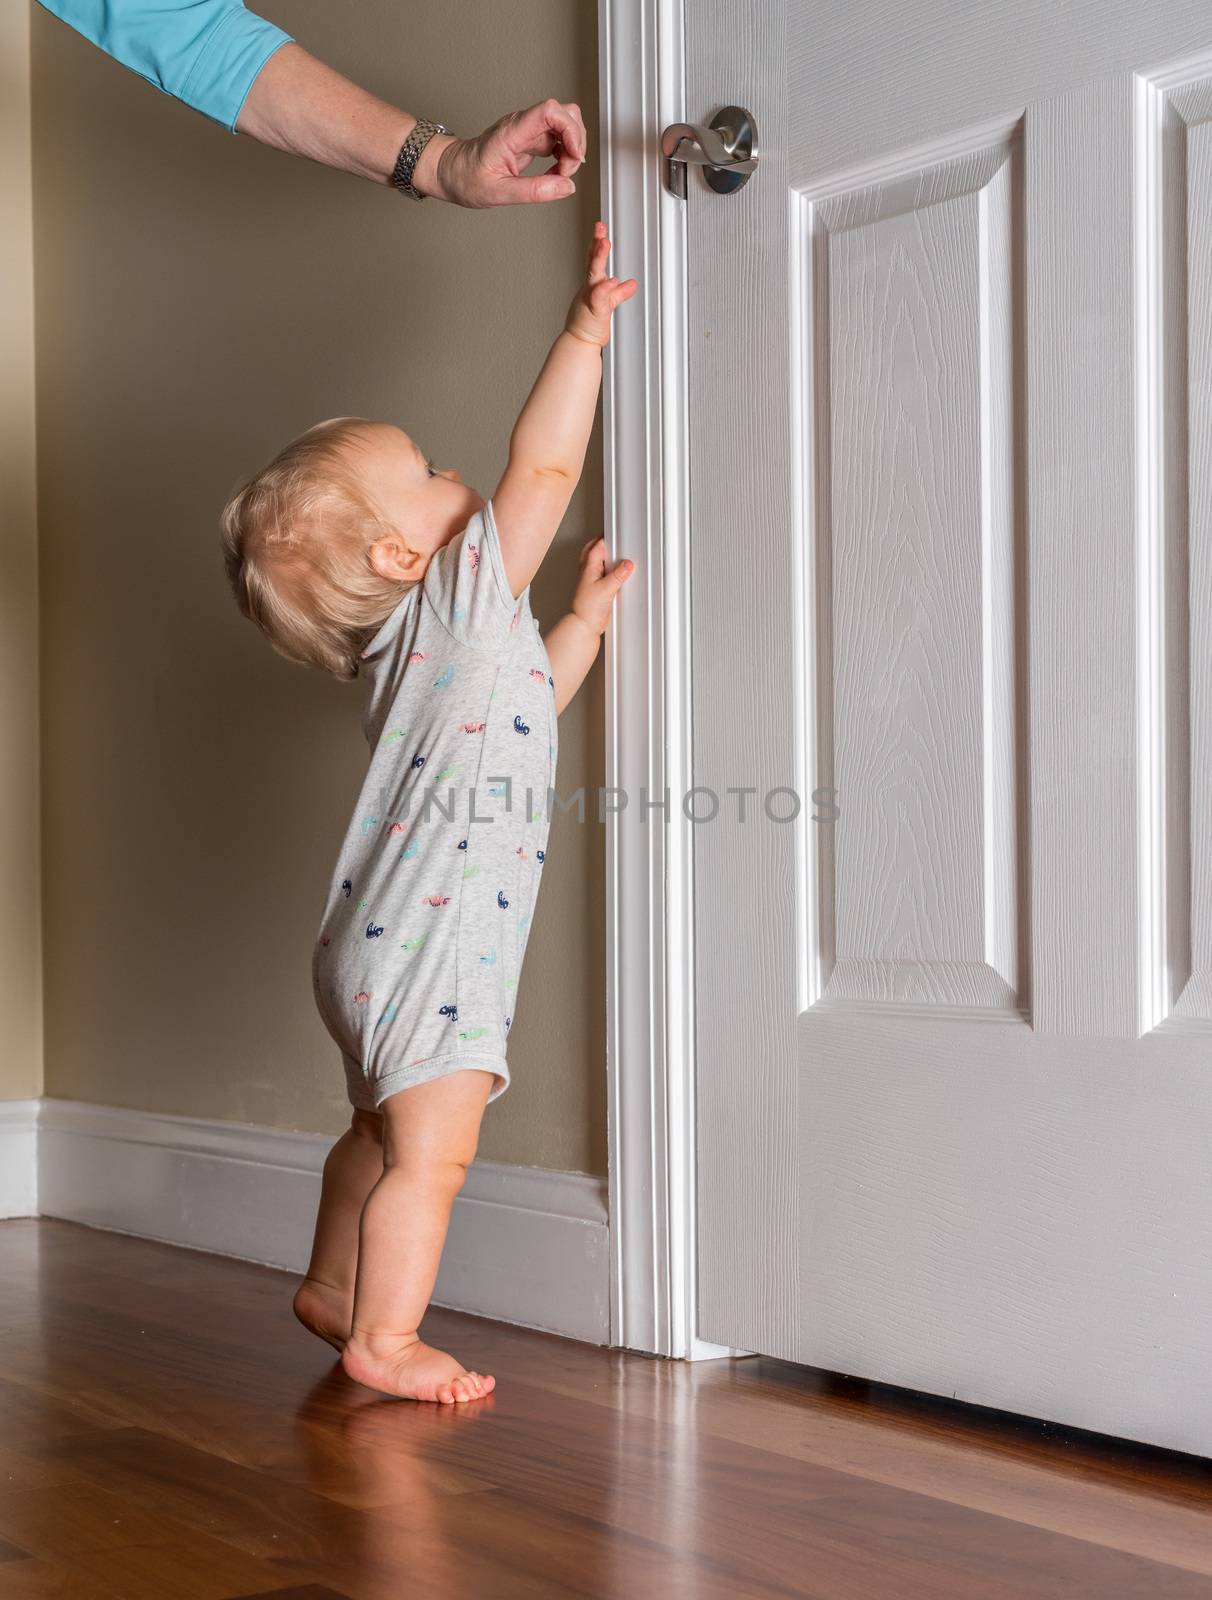 Young baby just able to walk reaching up for the door handle on wooden floor by steheap